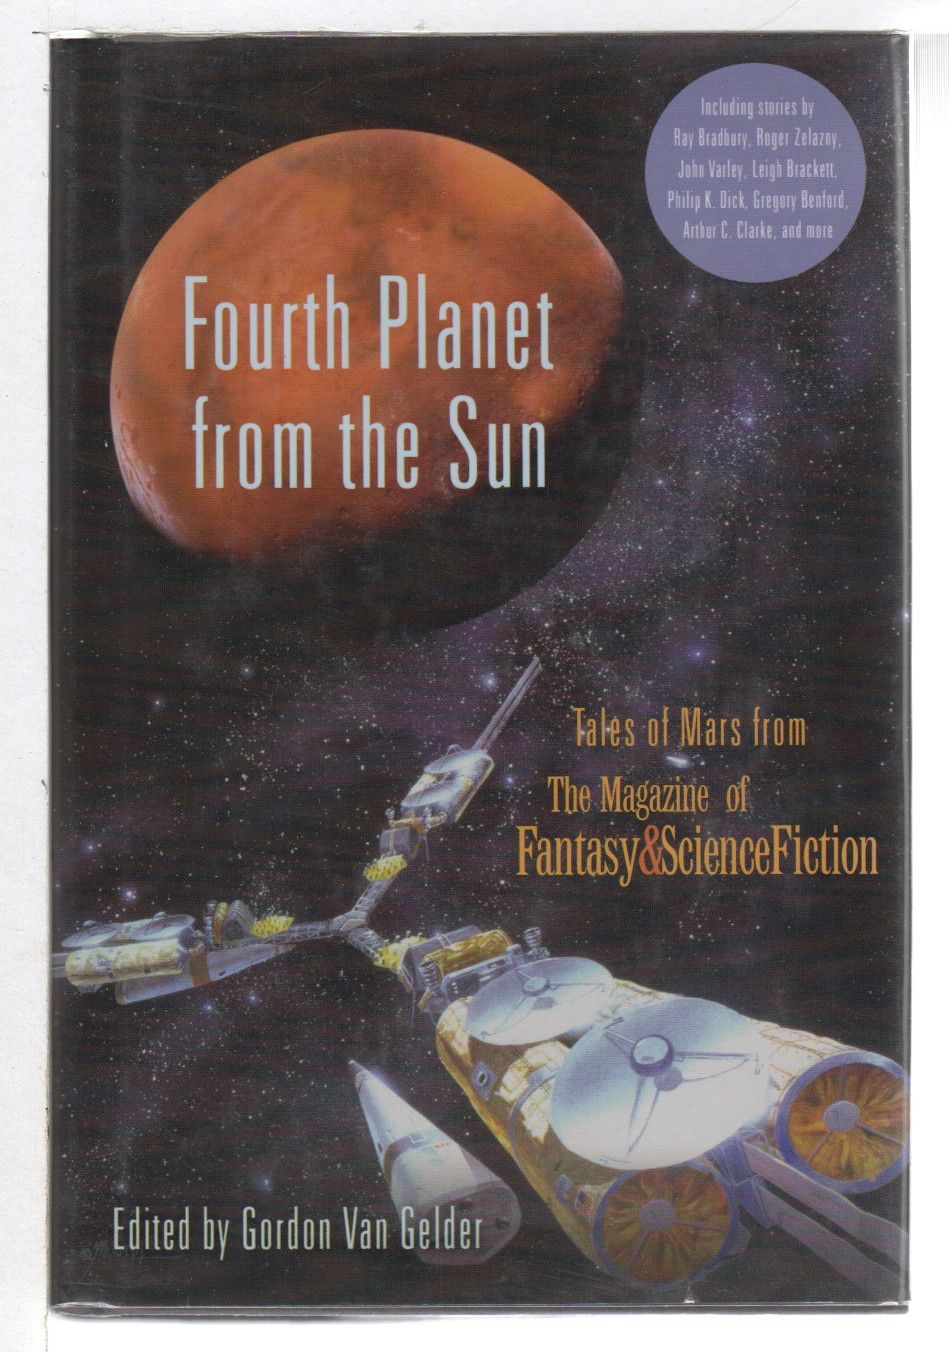 FOURTH PLANET FROM THE SUN: Tales of Mars from the Magazine of Fantasy and Science Fiction. - [Anthology, signed] Van Gelder, Gordon, editor; Gregory Benford, signed.